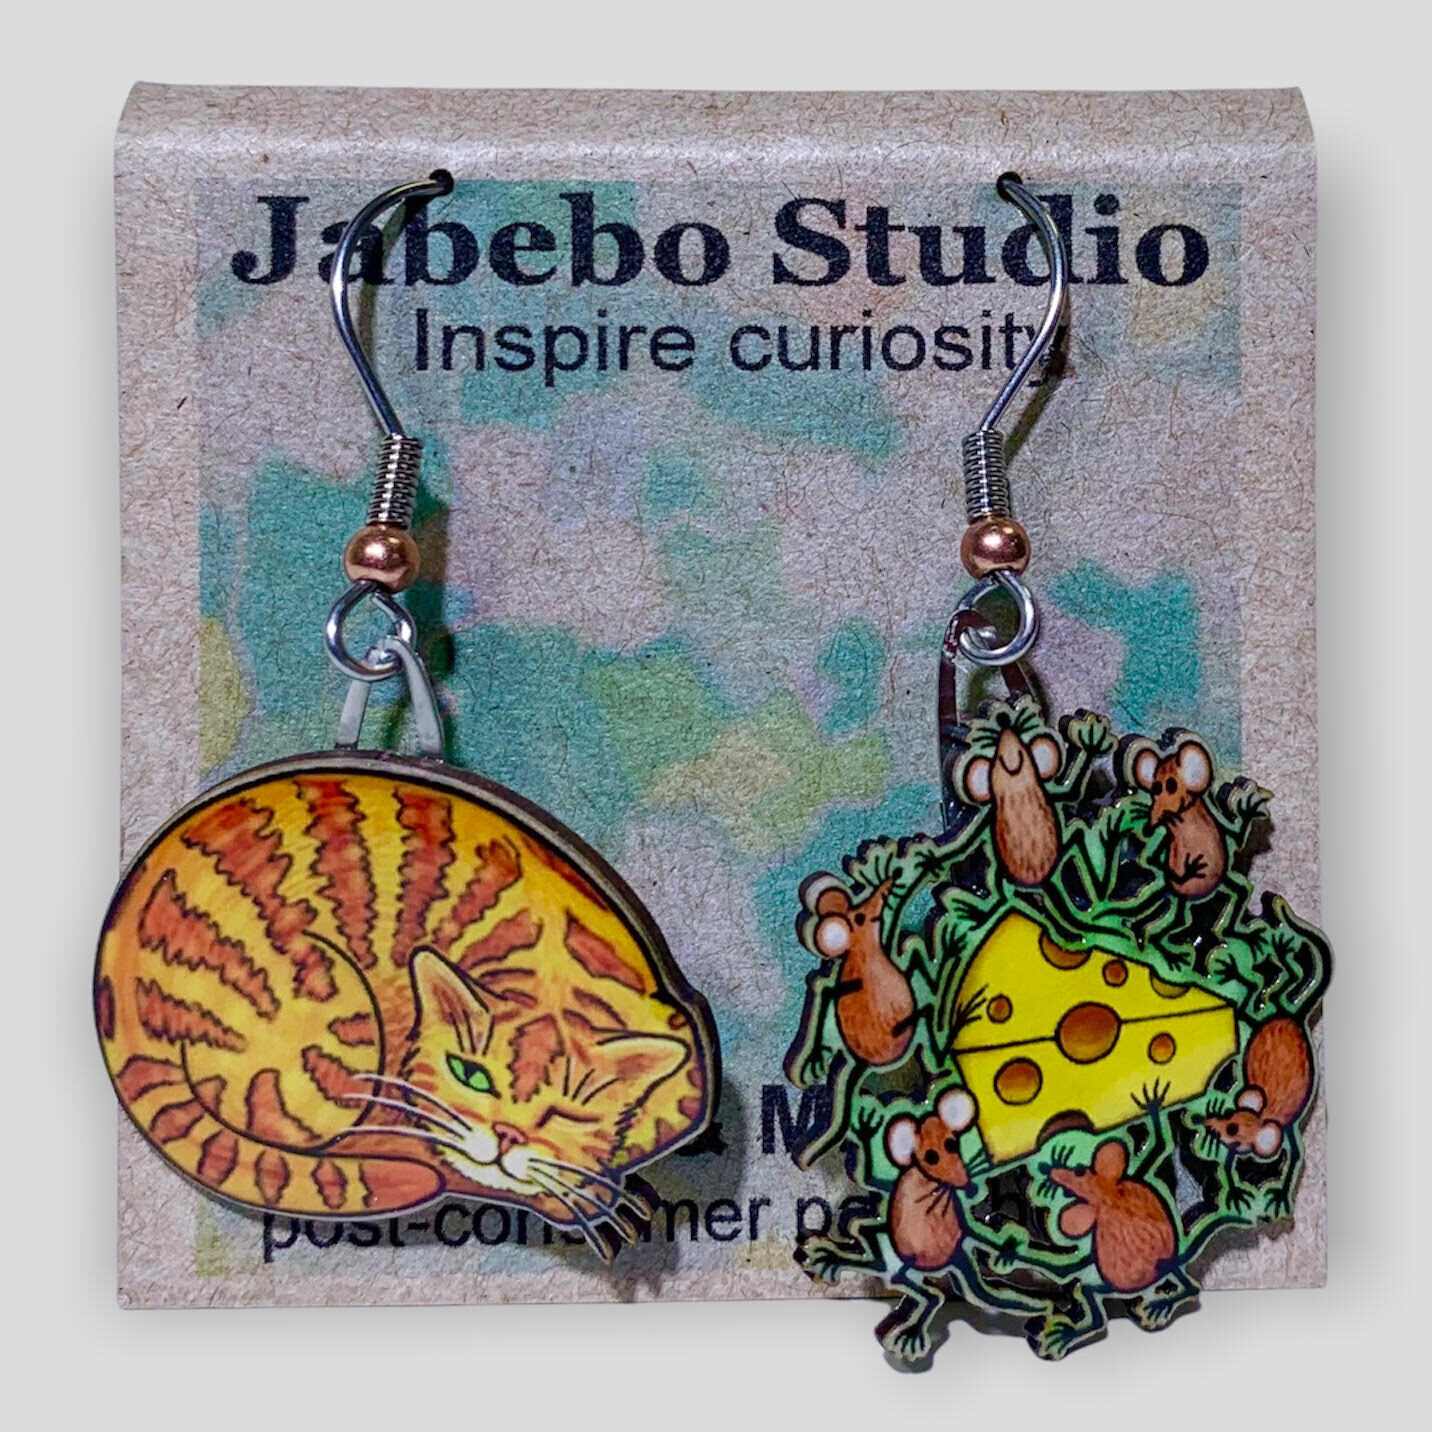 Picture shown is of 1 inch tall pair of earrings of the pet the Cat & Mice.